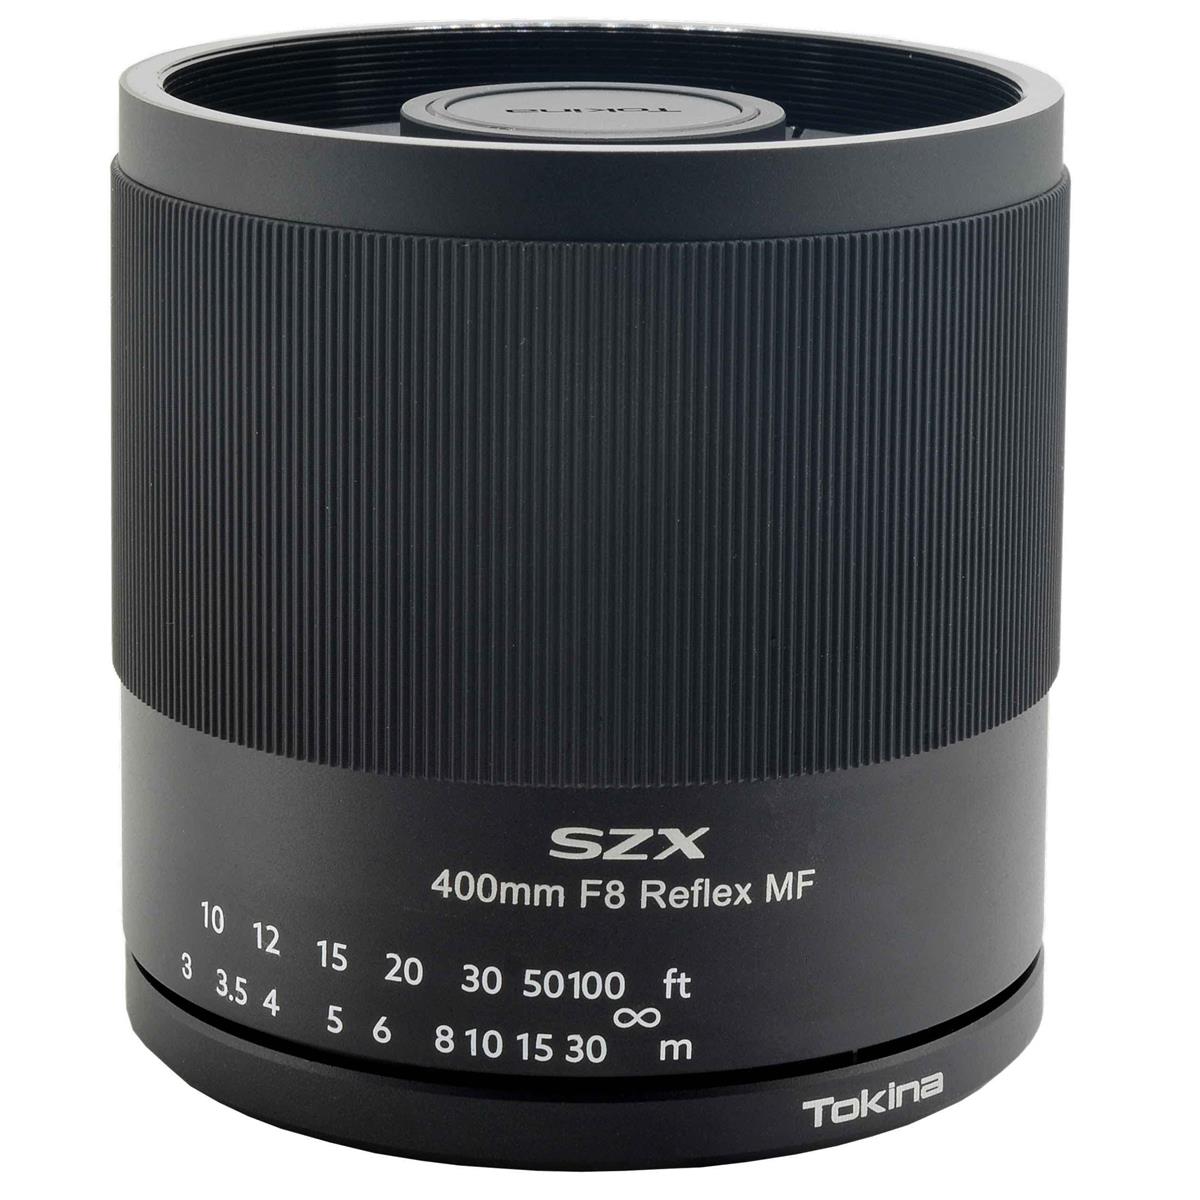 Image of Tokina SZX 400mm f/8 Reflex MF Lens for Canon EF